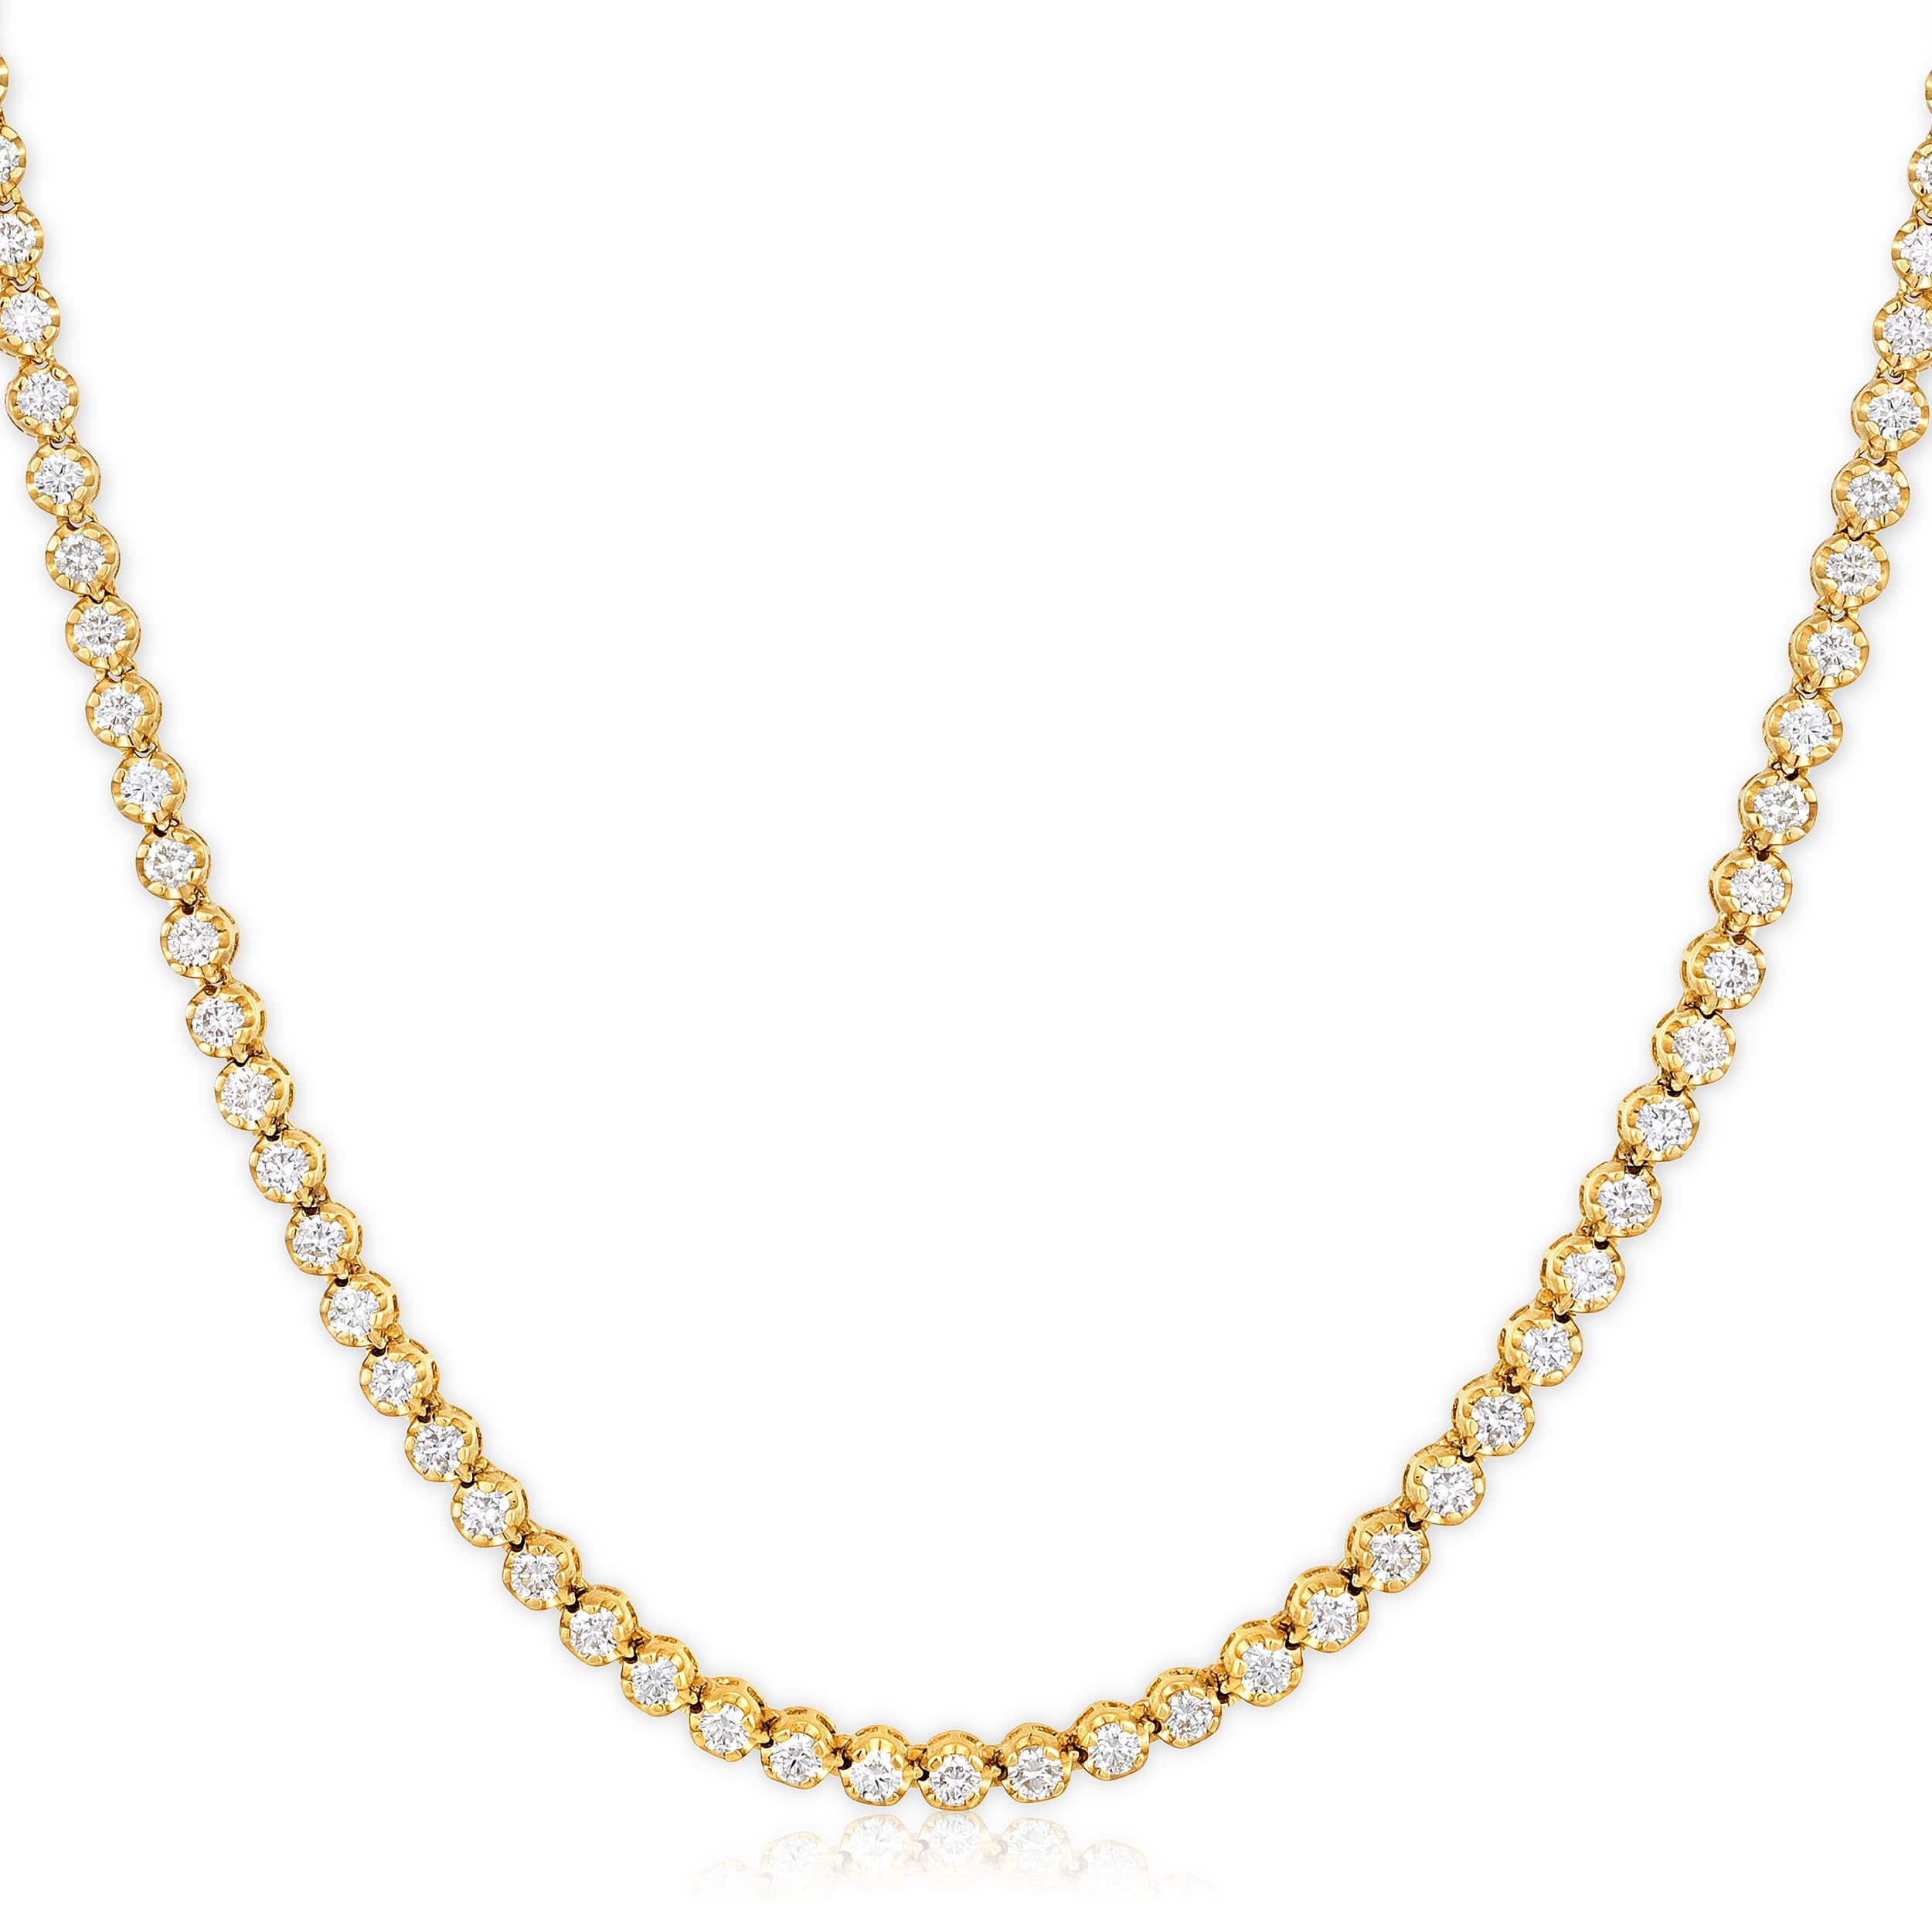 Crafted in 18.61 grams of 14K Yellow Gold, the necklace contains 123 stones of Round Natural Diamonds with a total of 4.98 carat in F-G color and SI clarity. The necklace length is 18 inches.

CONTEMPORARY AND TIMELESS ESSENCE: Crafted in